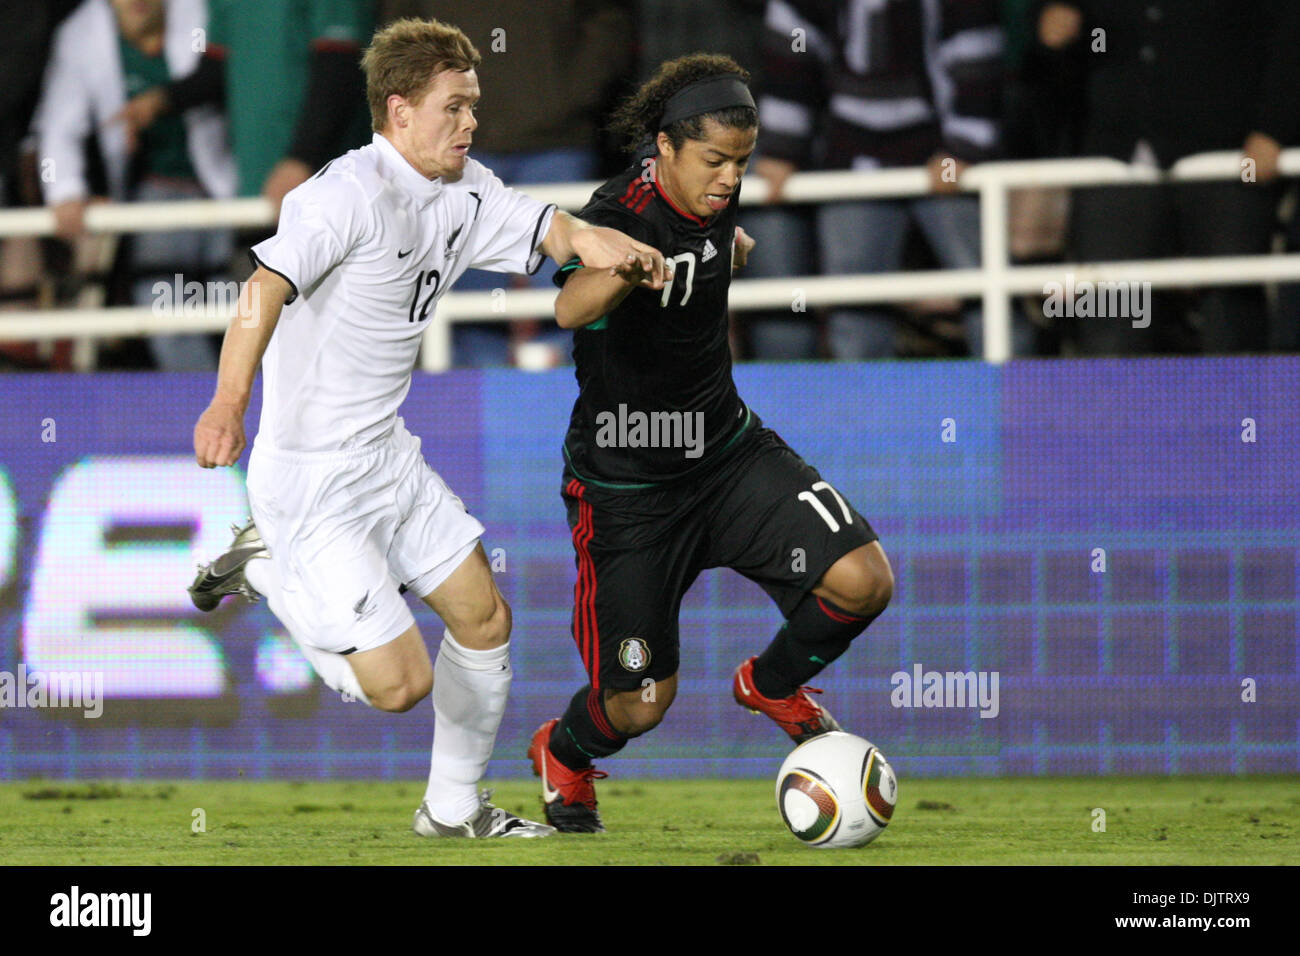 3 March 2010: Michael McGlinchey (L) and Giovani Dos Santos (R) fight for the ball during the New Zealand vs. Mexico international friendly at the Rose Bowl in Pasadena, California. Mandatory Credit: Brandon Parry / Southcreek Global (Credit Image: © Brandon Parry/Southcreek Global/ZUMApress.com) Stock Photo